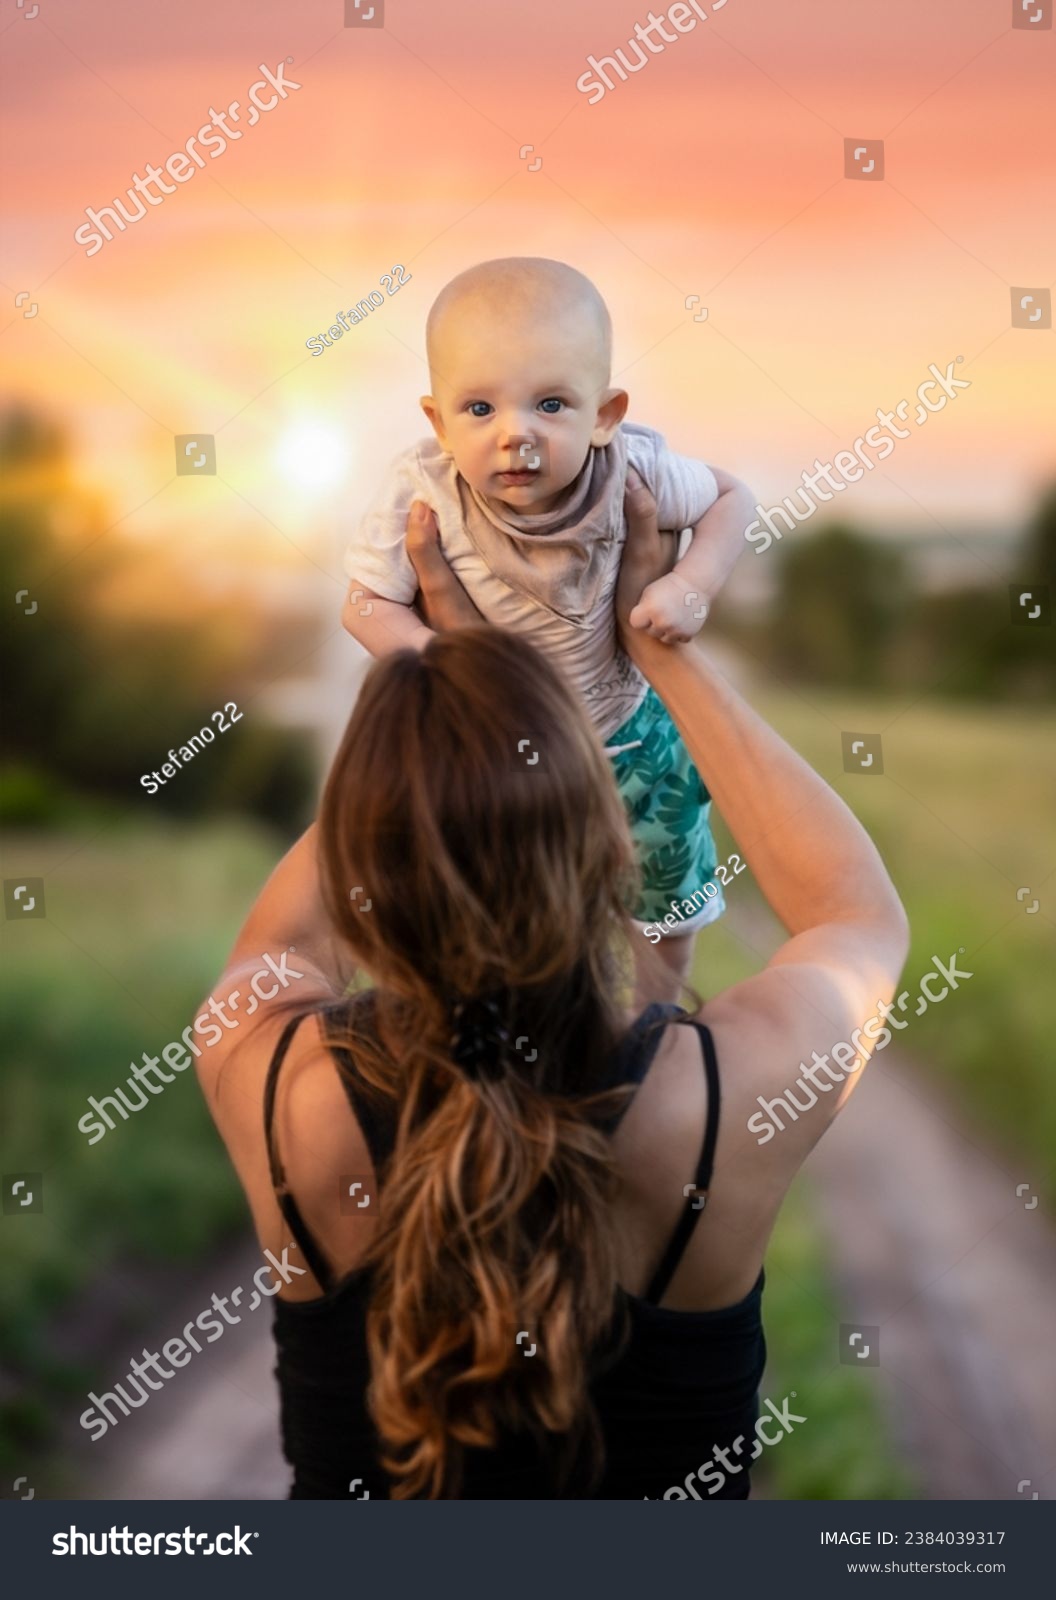 Sunset with a woman holding a small boy above her head. #2384039317